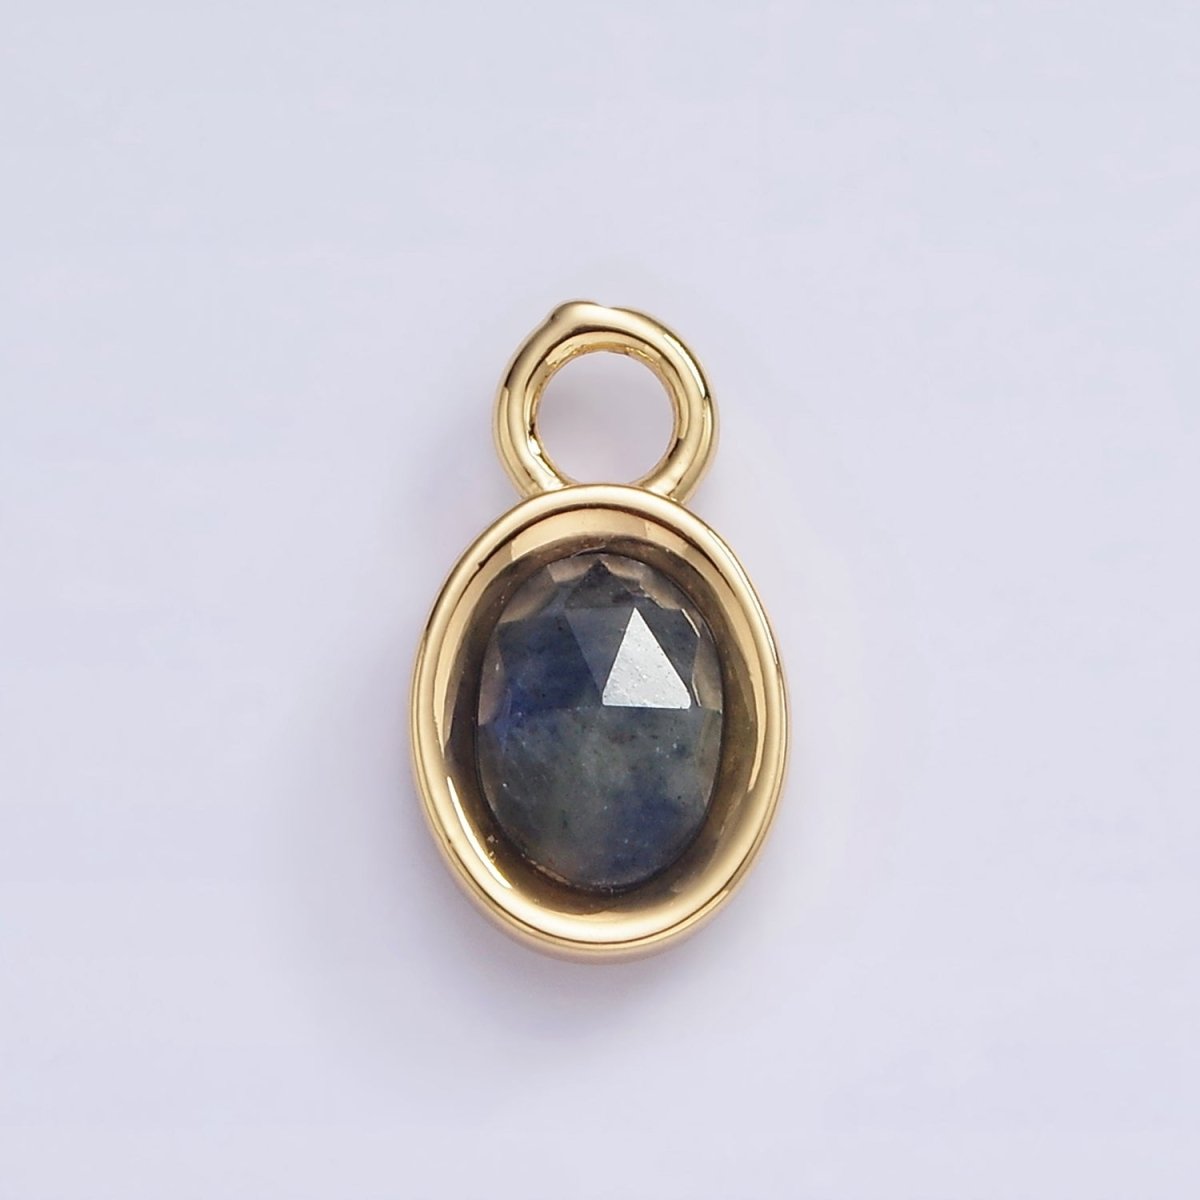 16K Gold Filled Oval Multifaceted Natural Gemstone Personalized Add-On Charm | AC1479 - AC1491 - DLUXCA